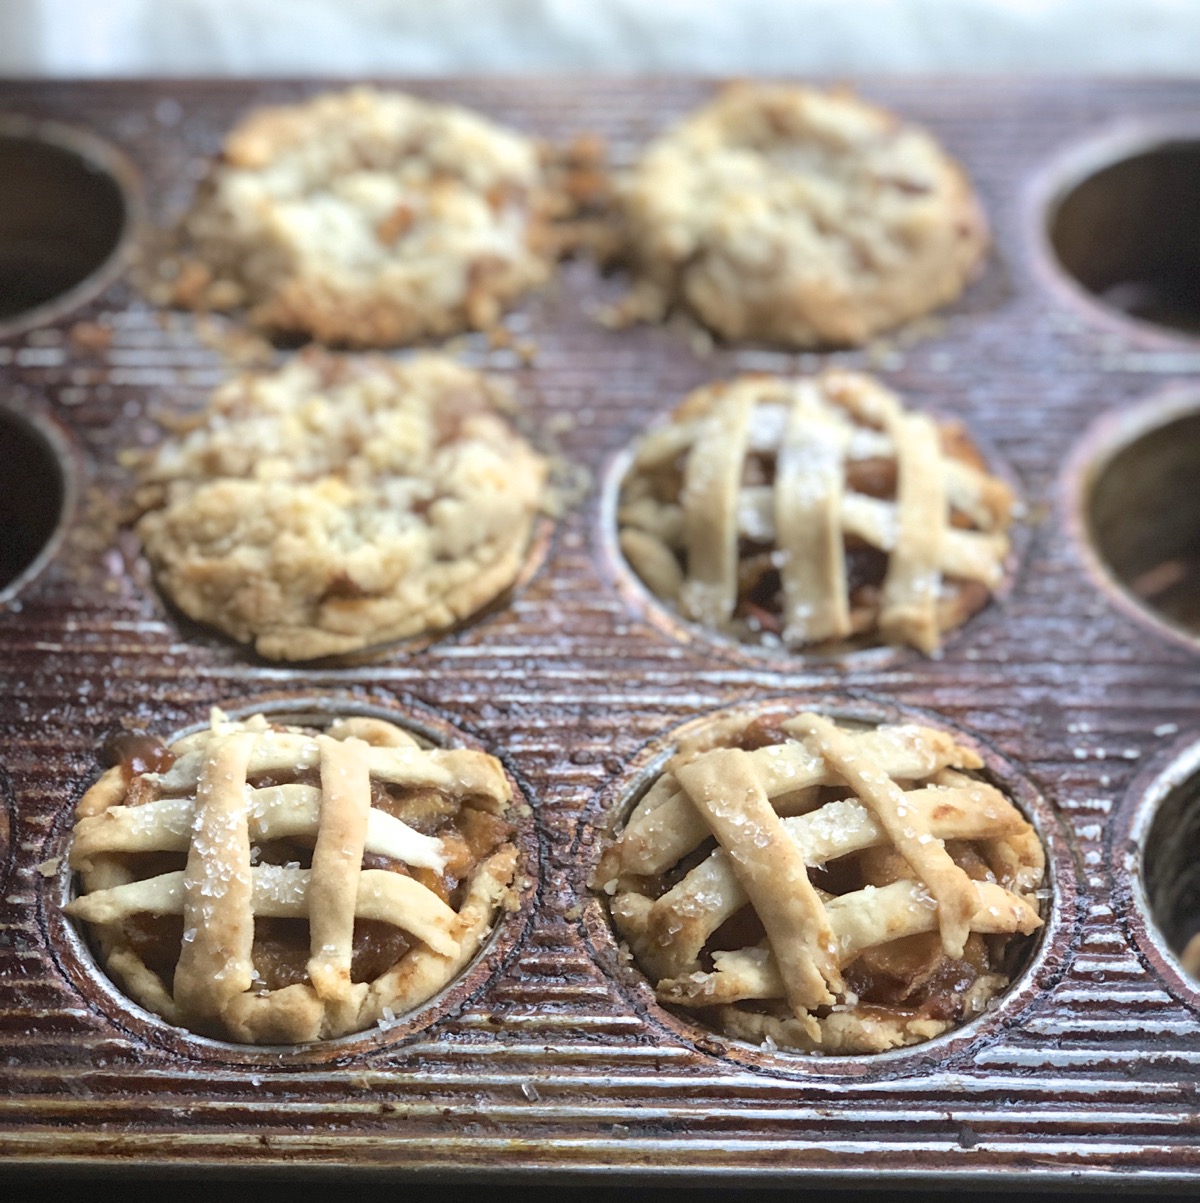 Mini apple pies baked in a mufin tin, some with lattice top crusts, some with crumb top crusts.